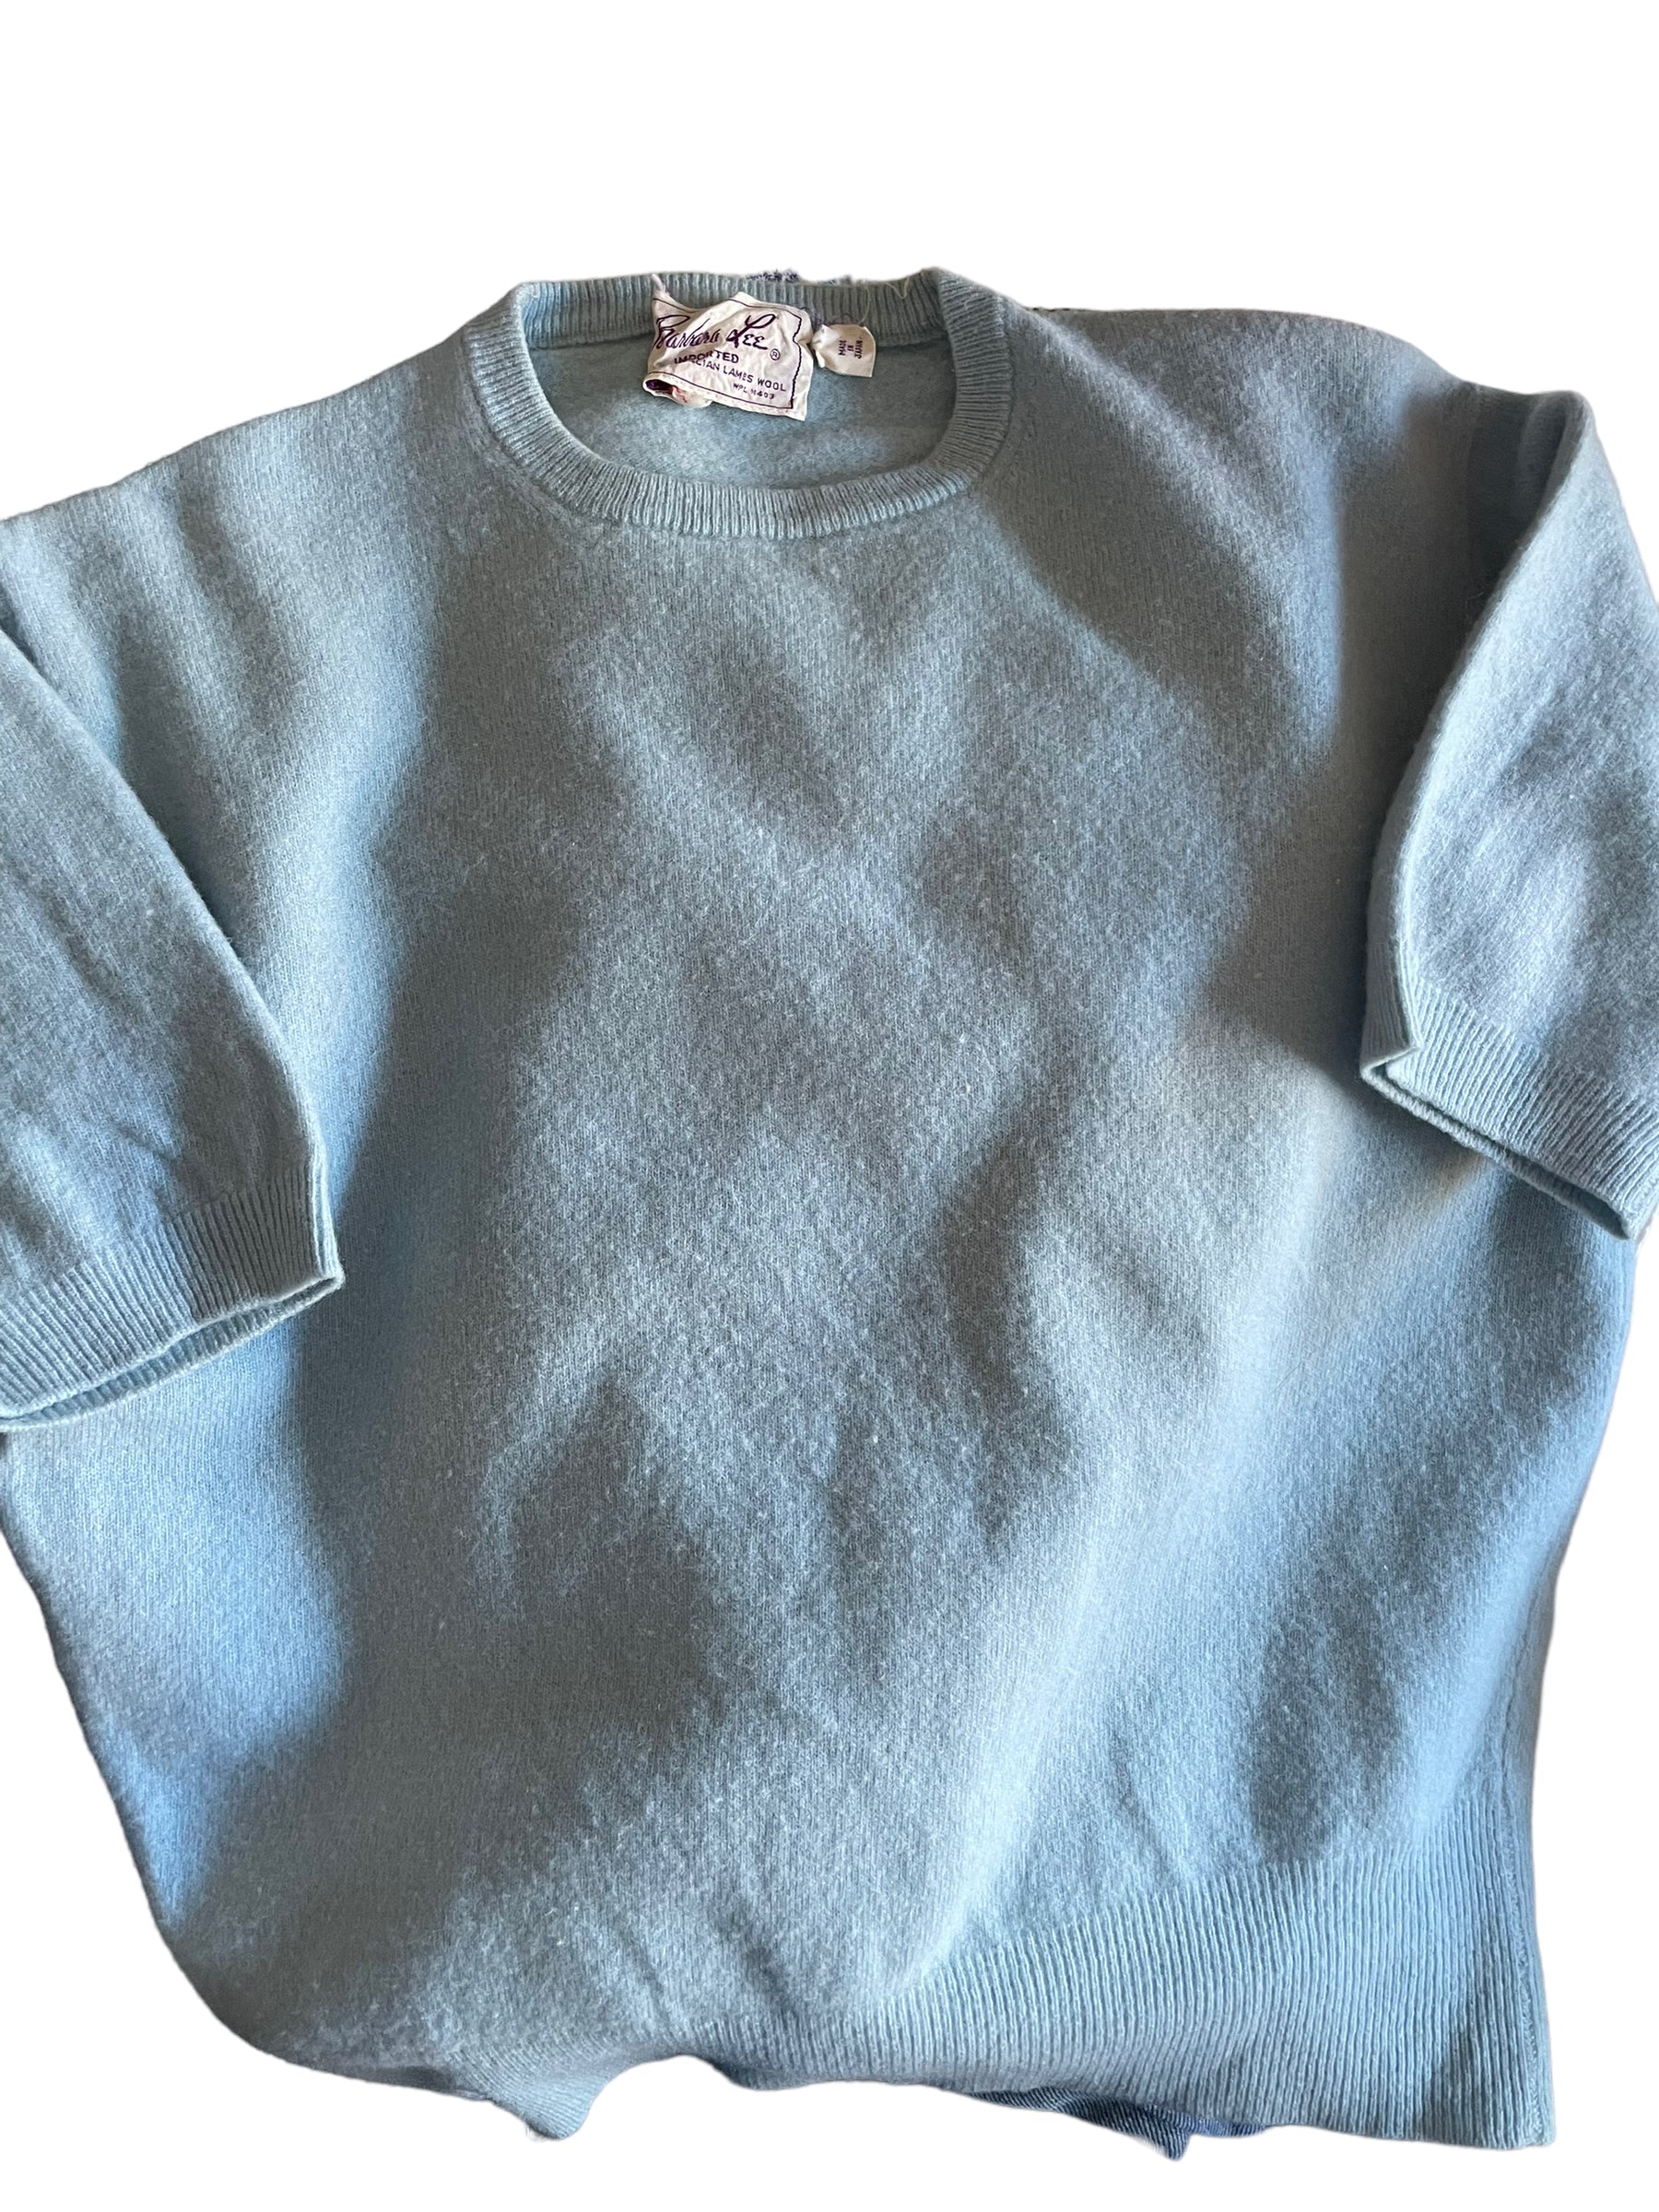 Front flat lay view of Vintage 1950s Blue Short Sleeve Lamb's Wool Sweater | Seattle Vintage Sweaters | Barn Owl Vintage